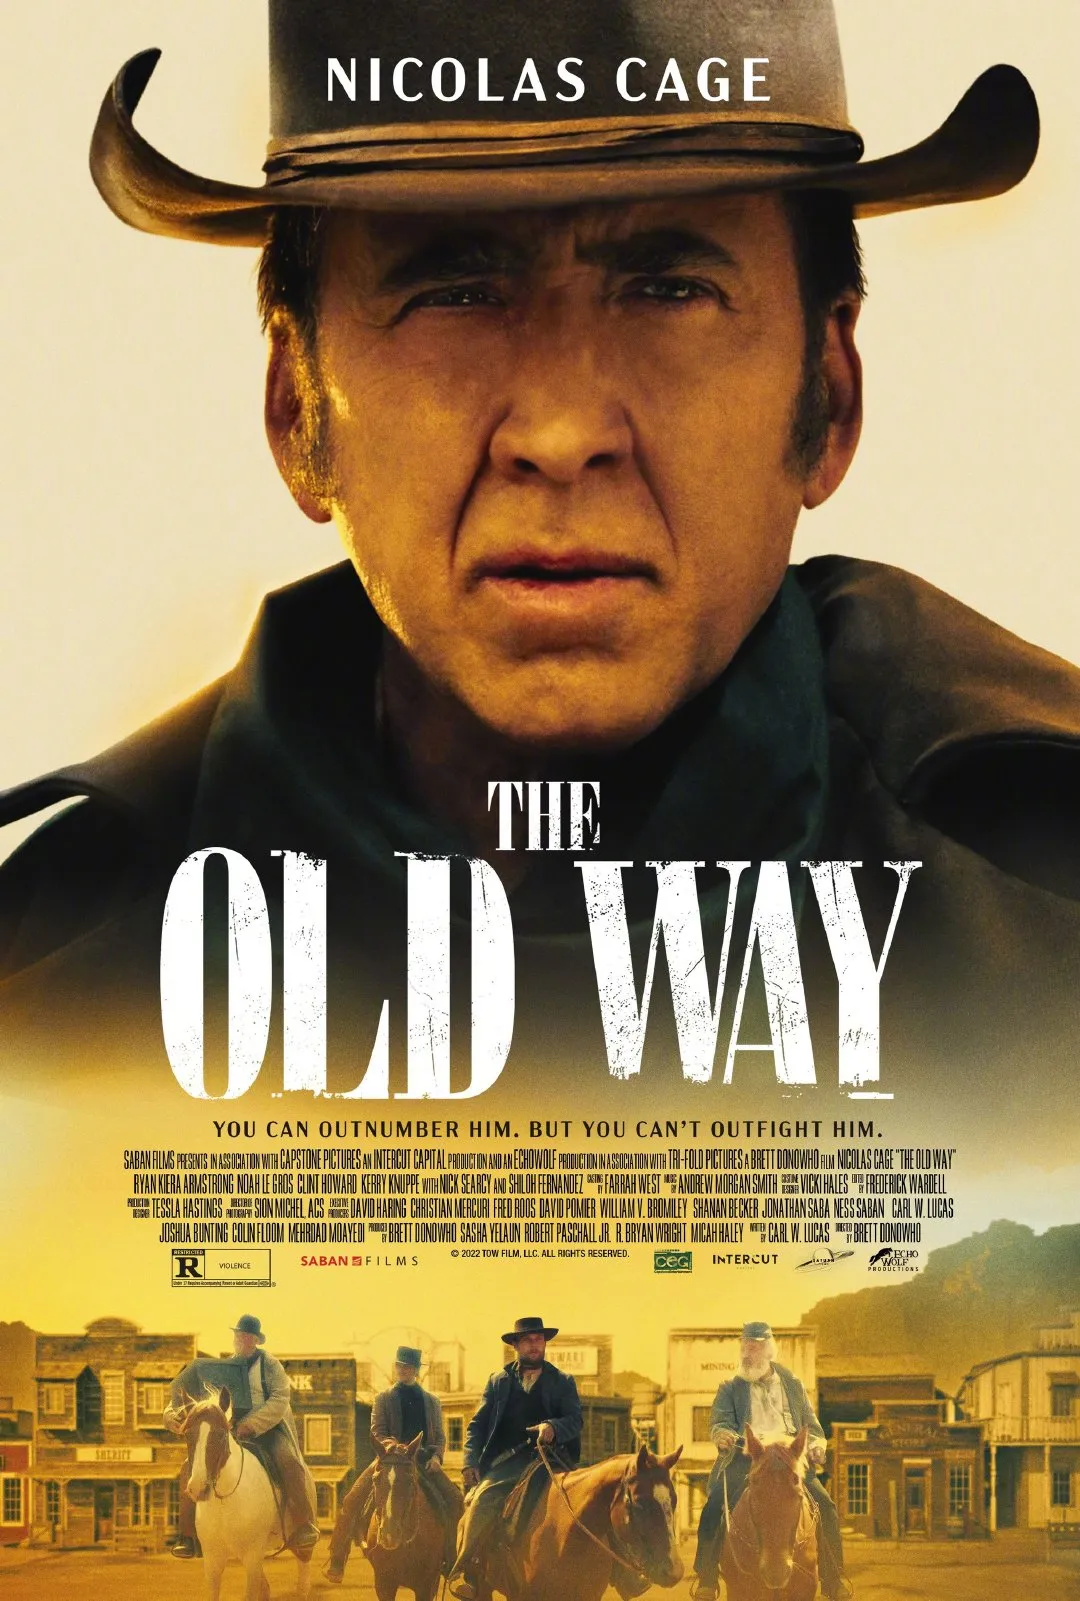 Nicolas Cage's new film "The Old Way‎" reveals trailers and posters, middle-aged cowboy and daughter team up for revenge | FMV6